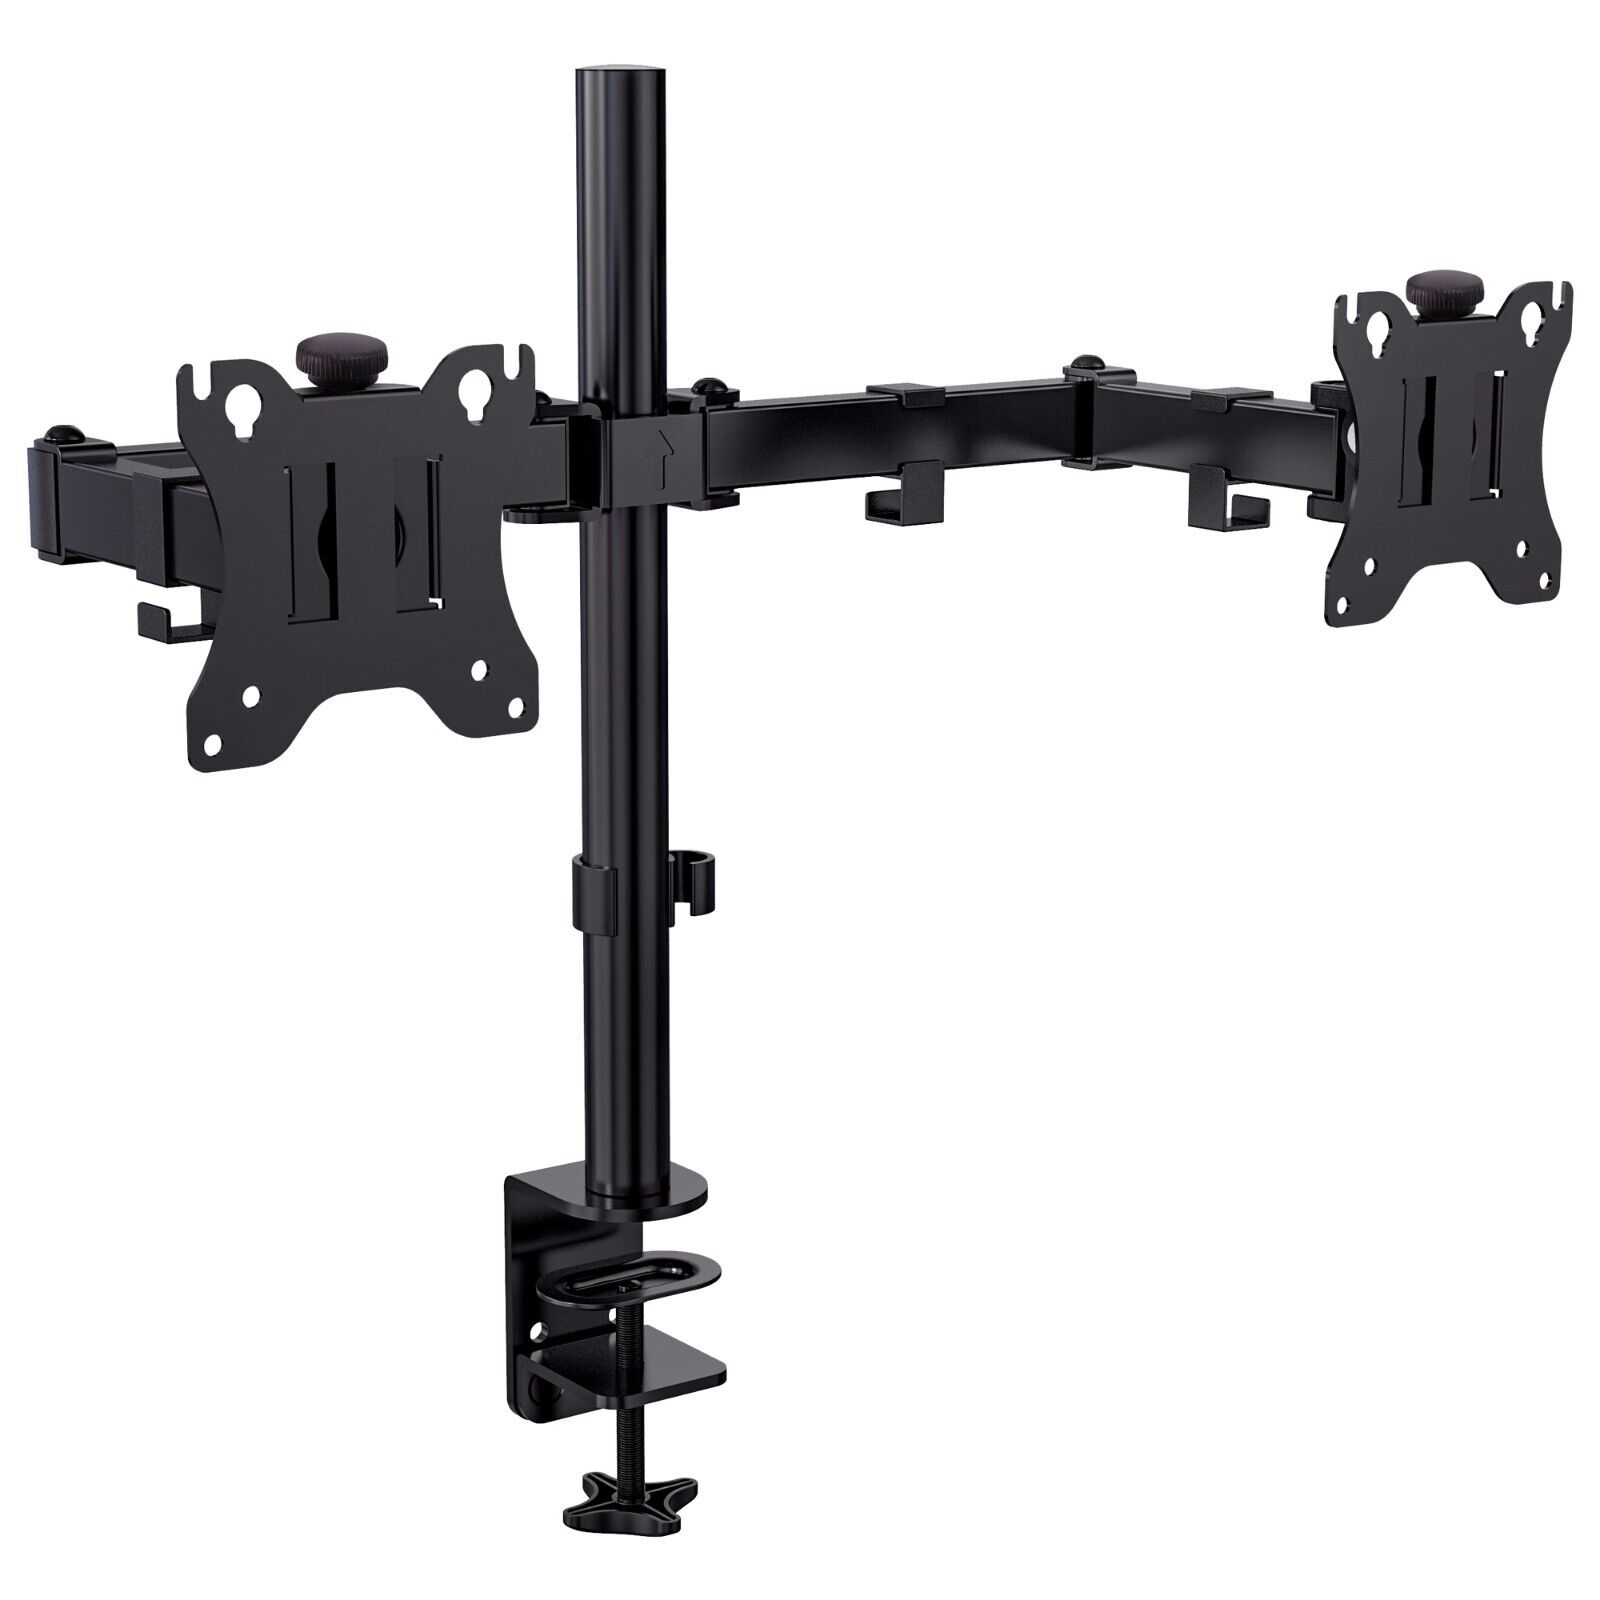 JUICEUP Dual Monitor Stand Mount, Adjustable Full Motion, 13 – 27 inch Screen